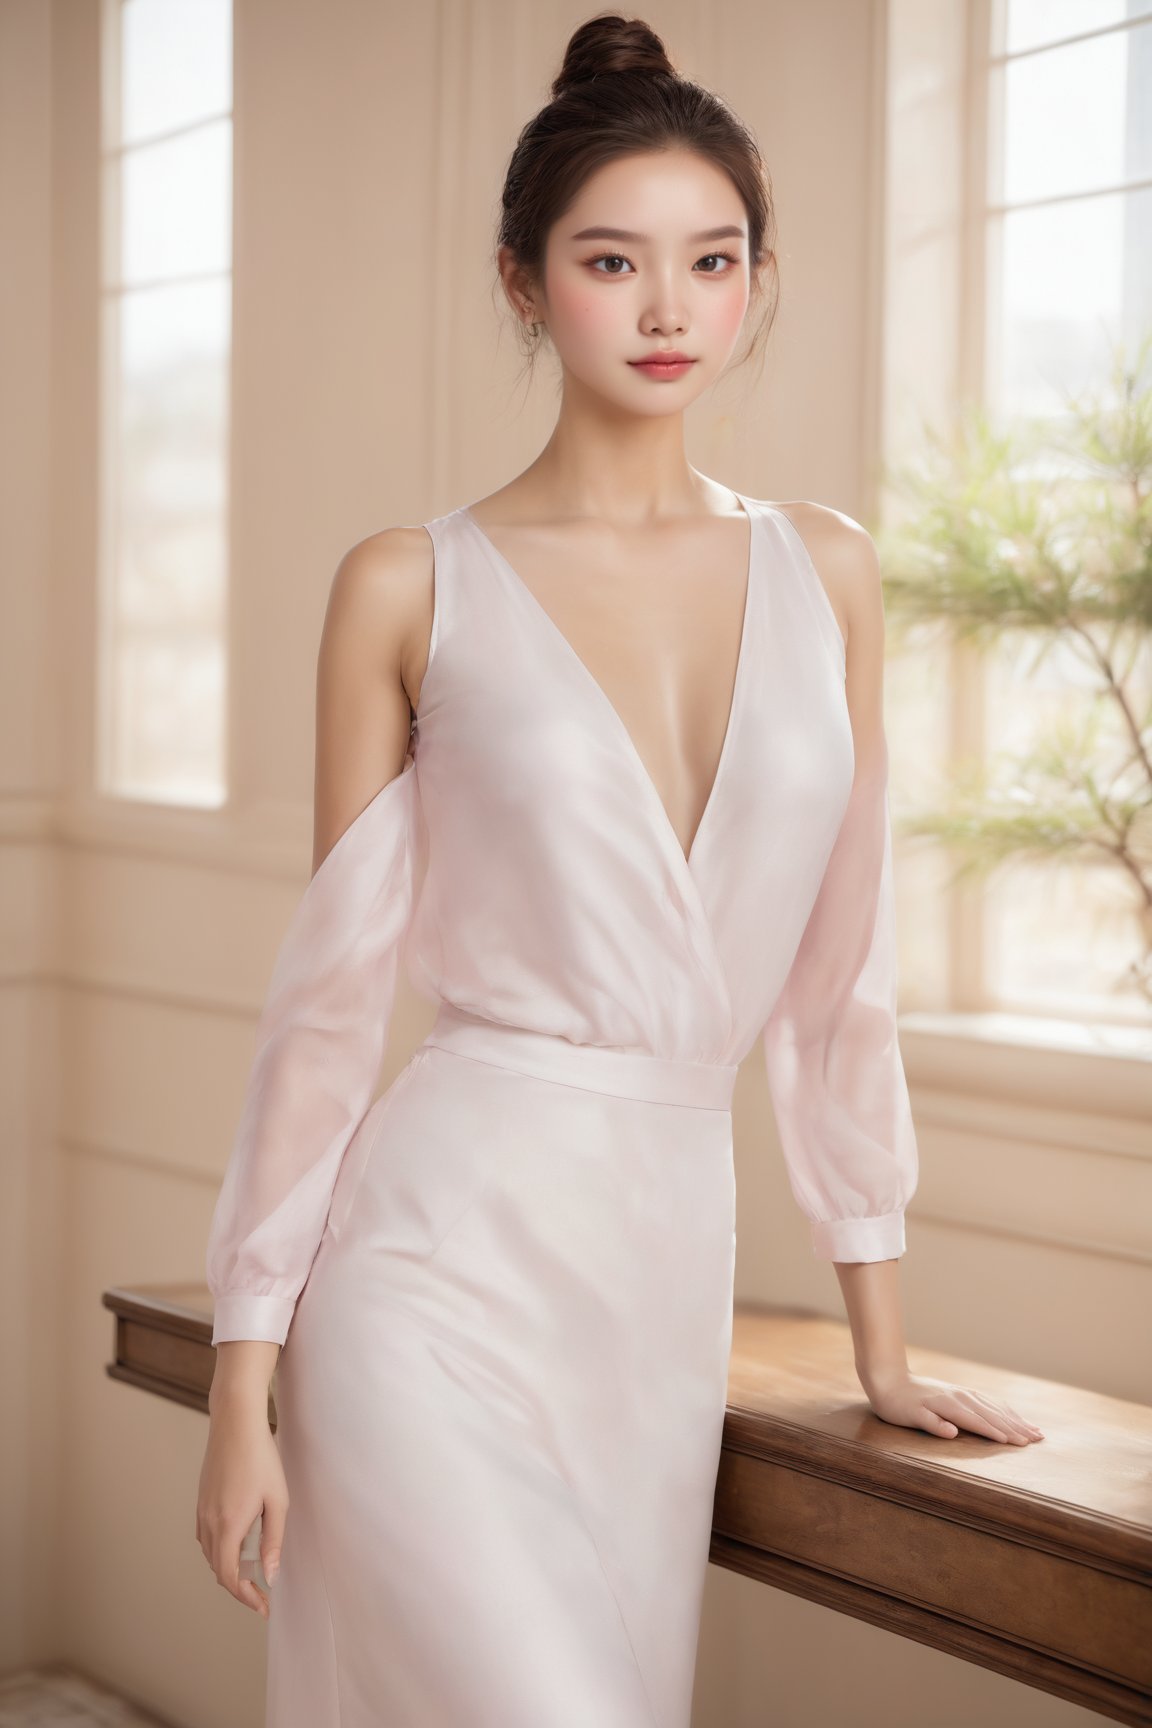 (ultra best quality, in 8K, masterpiece, delicate illustration), 1girl, perfect body,((reality skin)),(silk clothing),dynamic posture, high bun hair, beautiful face, perfect body, red lips, smile